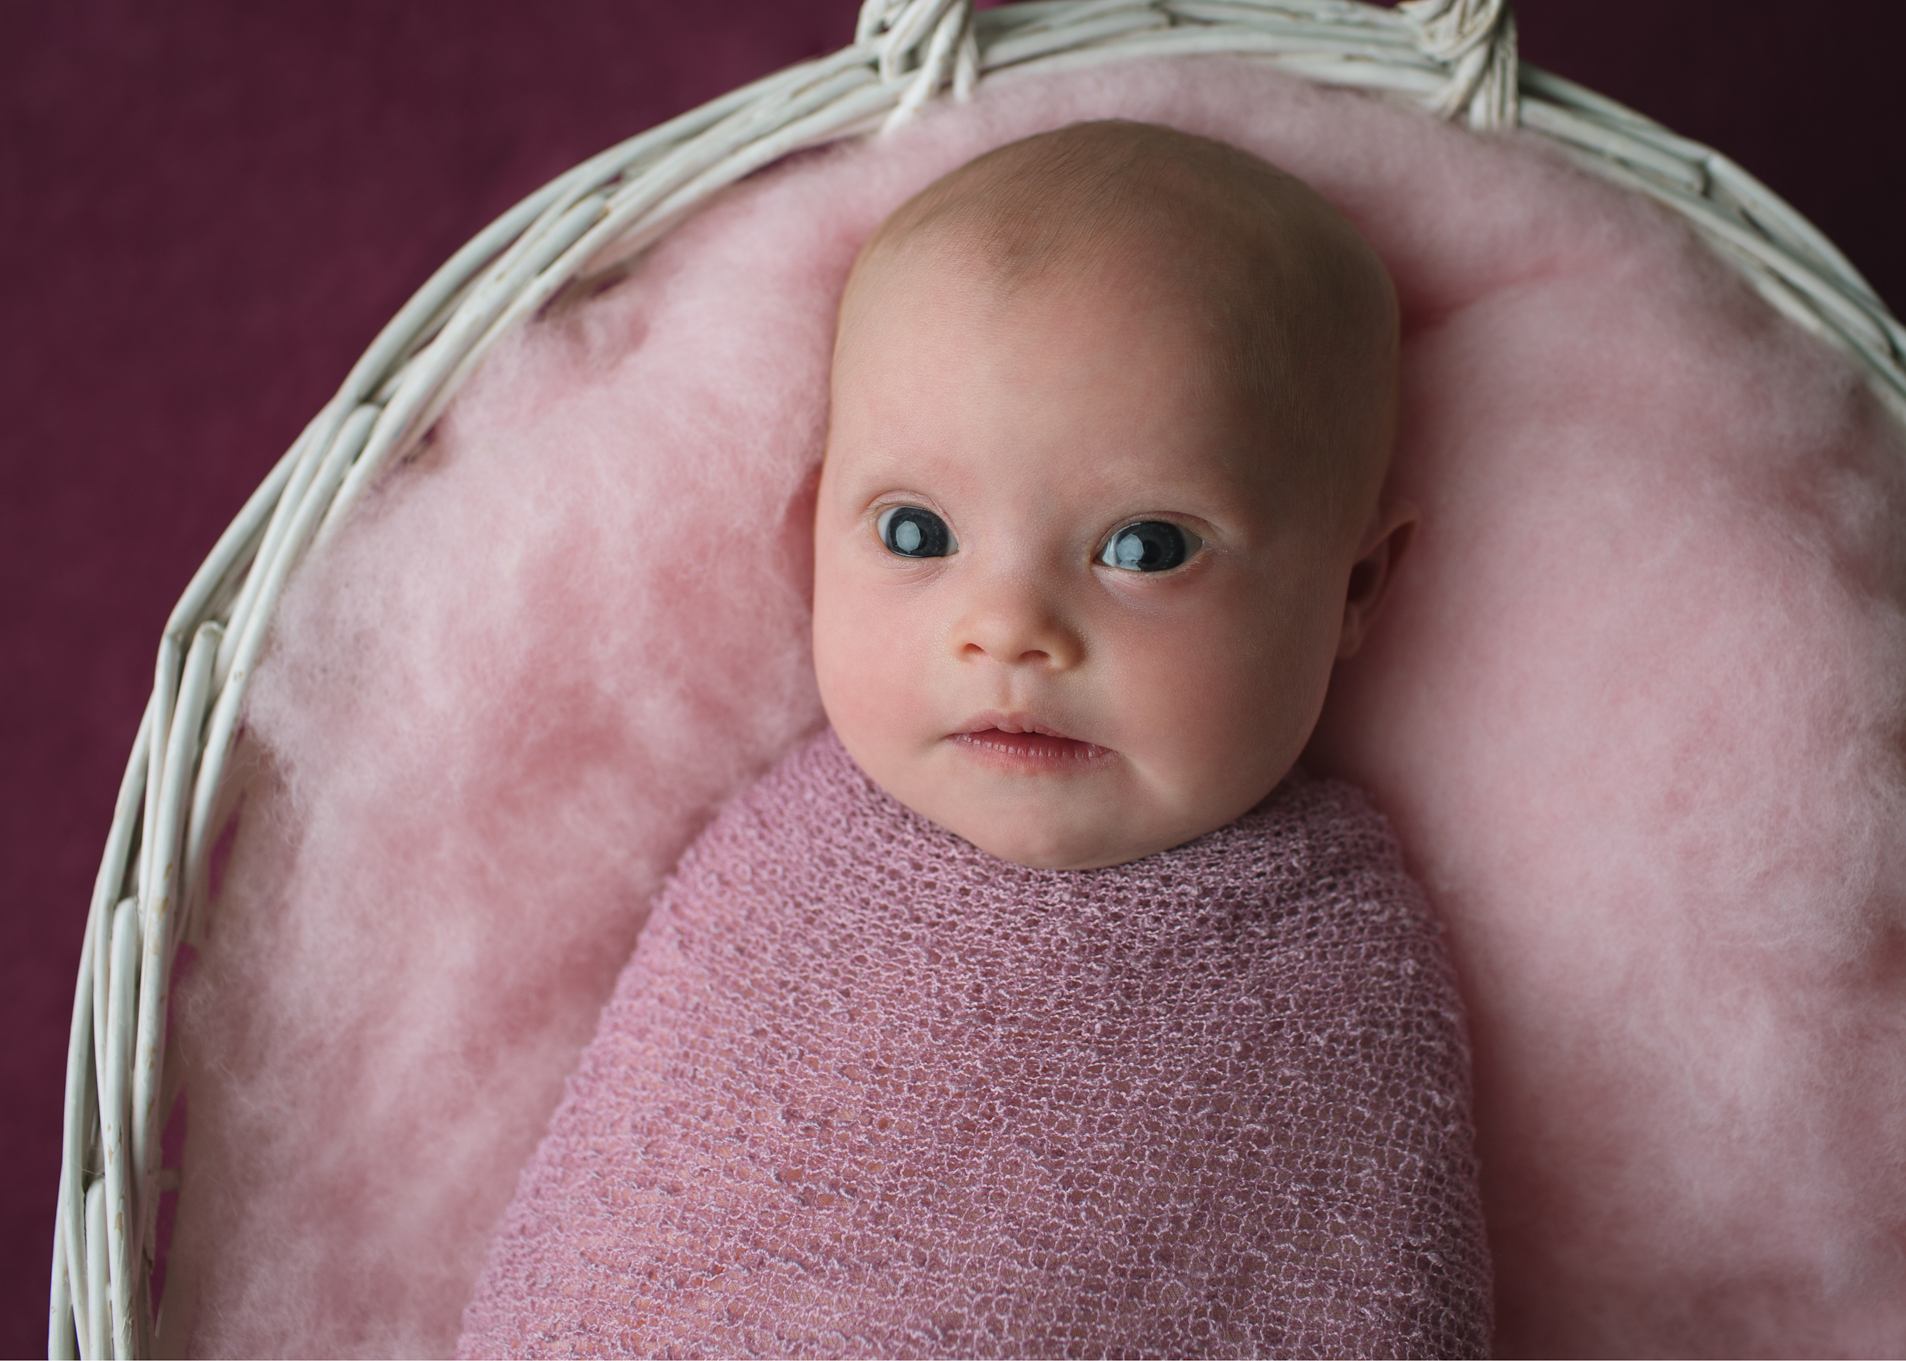 Newborn baby with down syndrome photographer in Caerphilly, Cardiff, South Wales